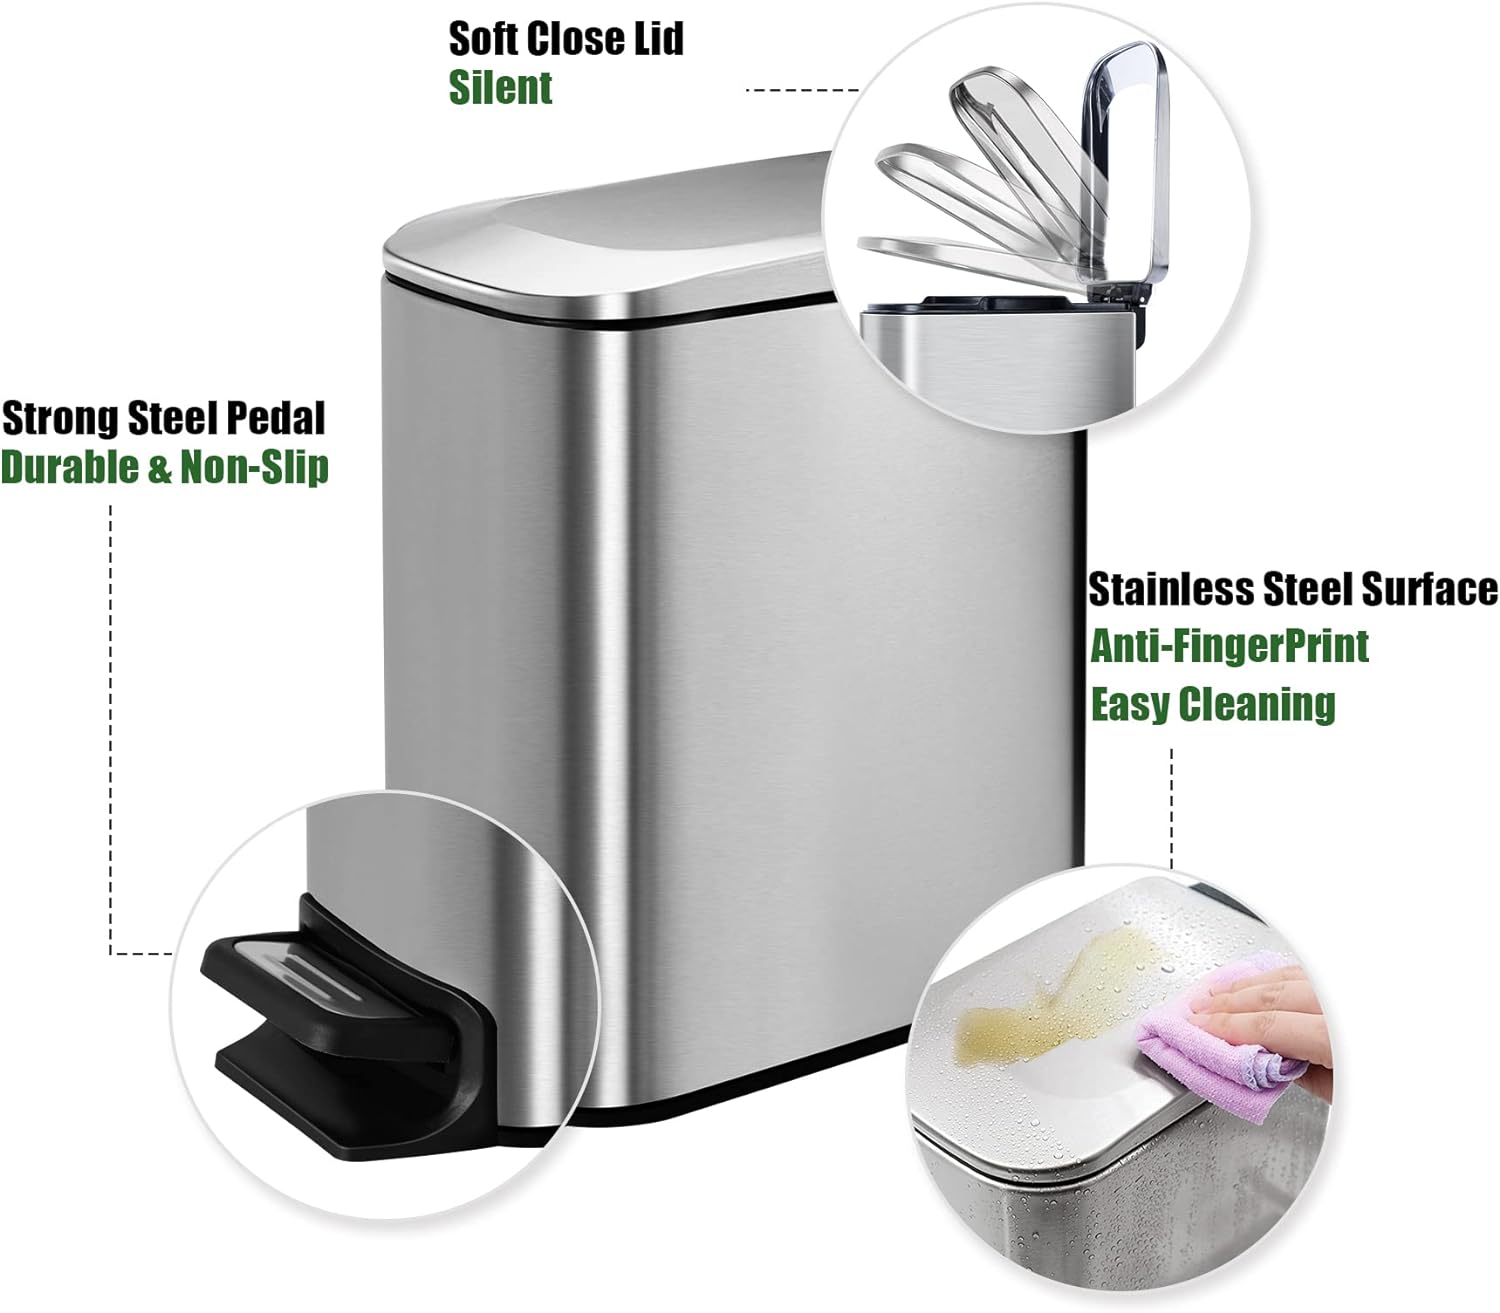 Cesun Small Bathroom Trash Can with Lid Soft Close, Step Pedal, 6 Liter / 1.6  Gallon Stainless Steel Garbage Can with Removable Inner Bucket,  Anti-Fingerprint Finish (Silver)